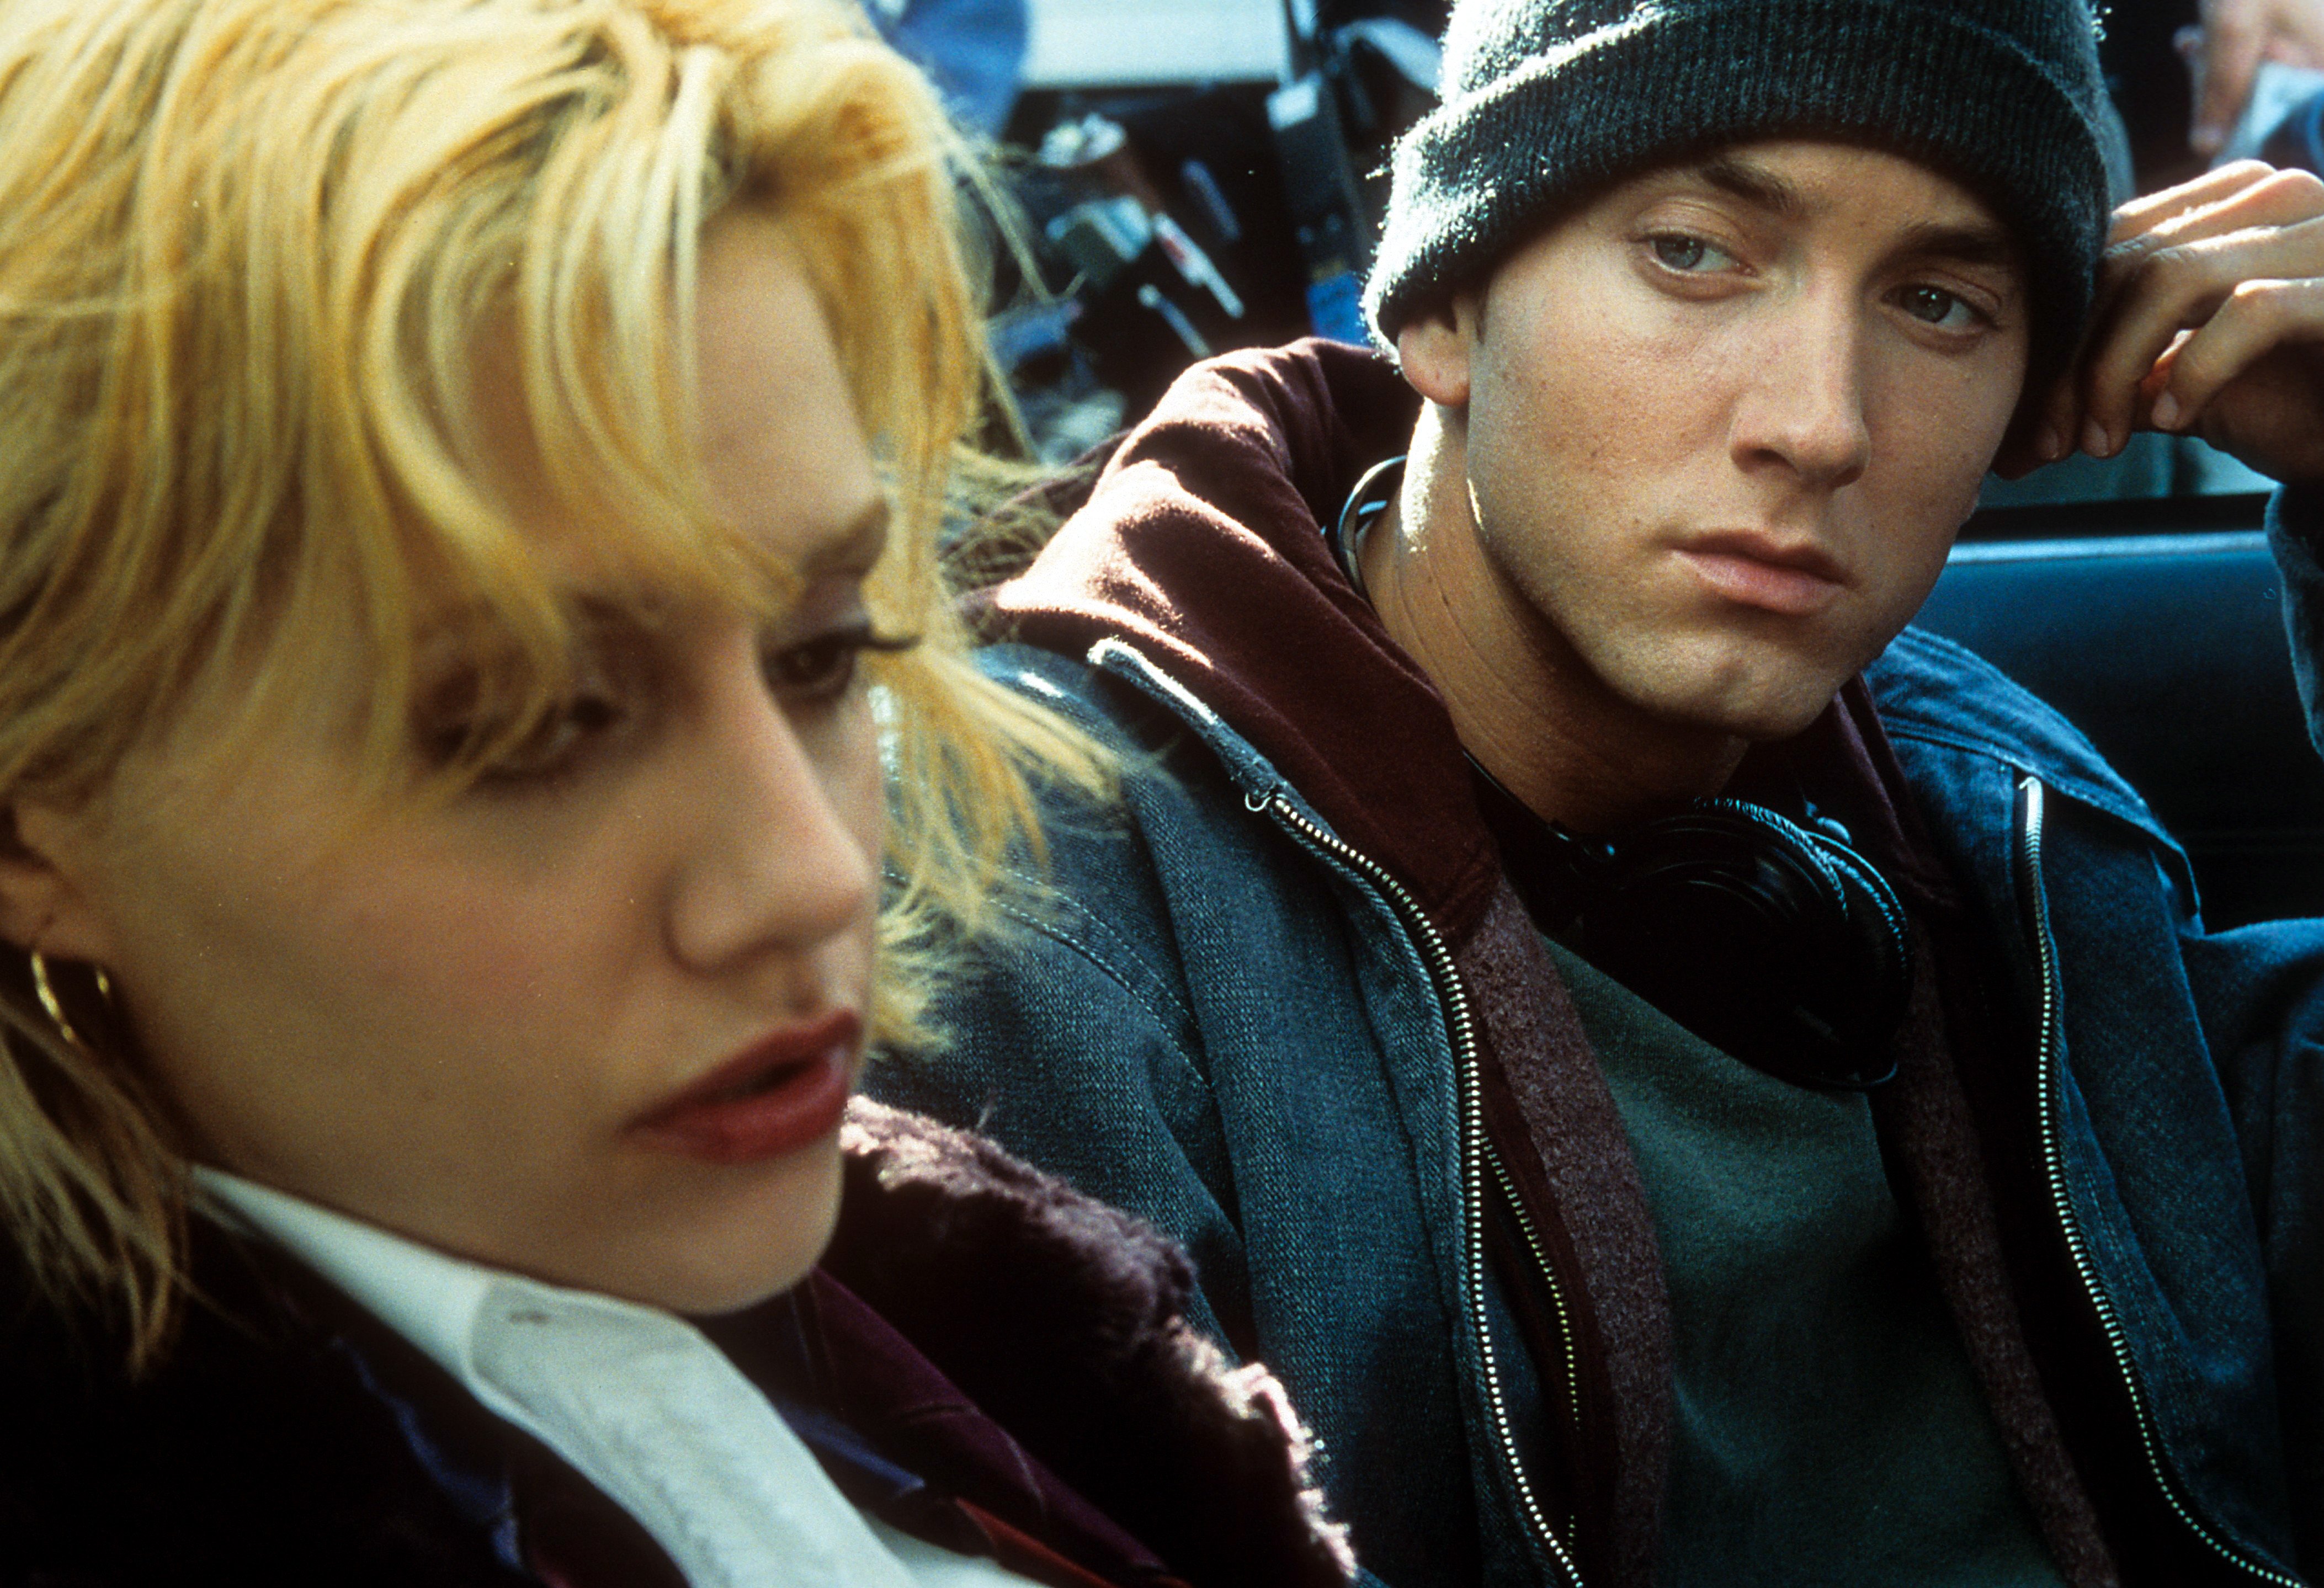 Eminem and Brittany Murphy in a "8 Mile" scene in 2002 | Source: Getty Images 